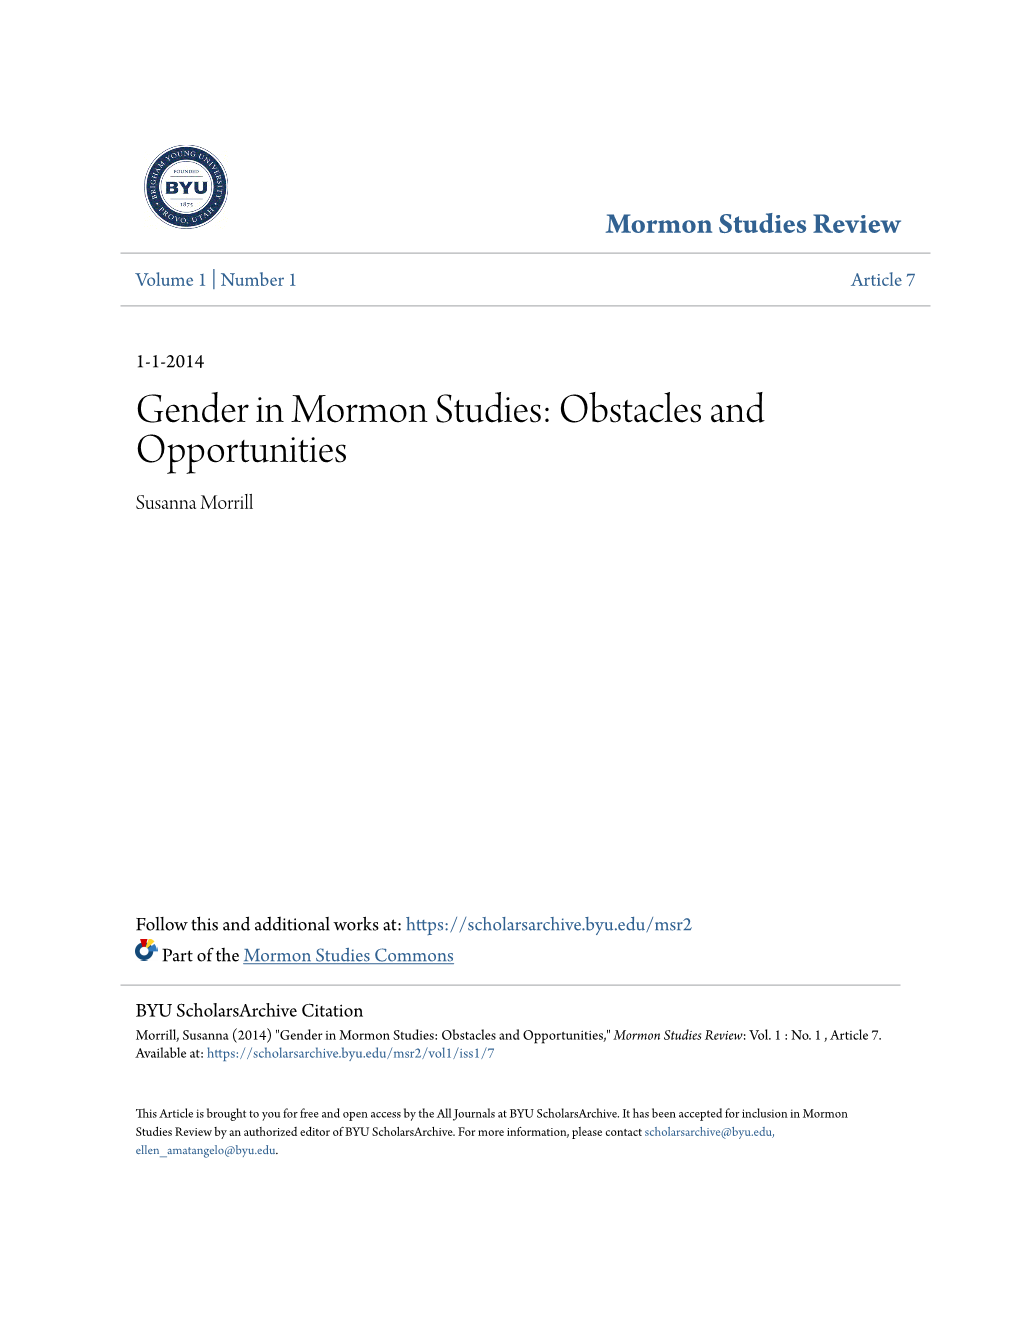 Gender in Mormon Studies: Obstacles and Opportunities Susanna Morrill